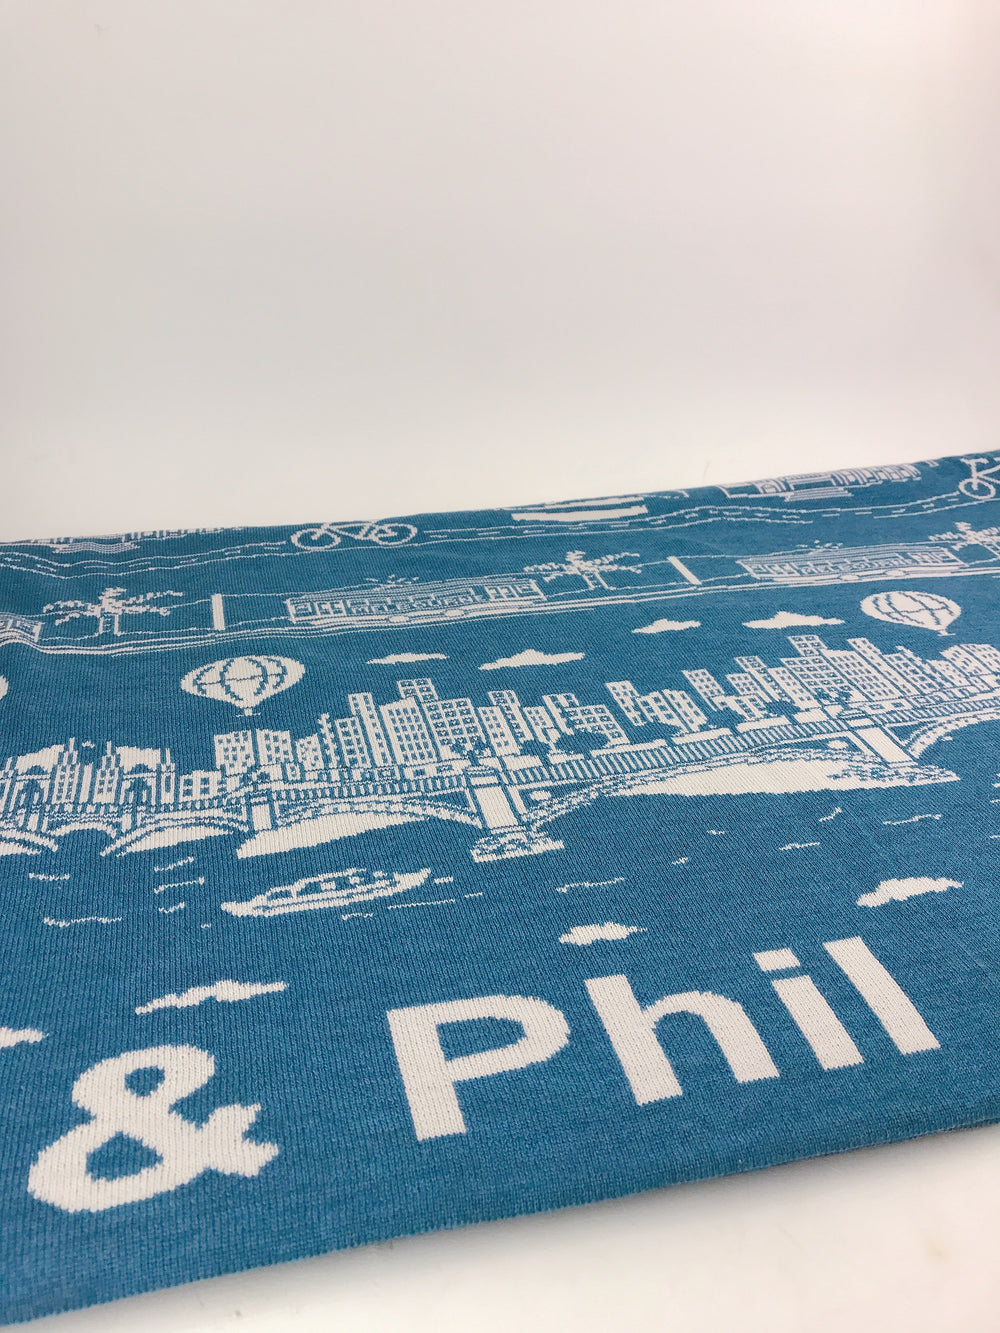 PERSONALISED BLANKETS - MELBOURNE -  - 